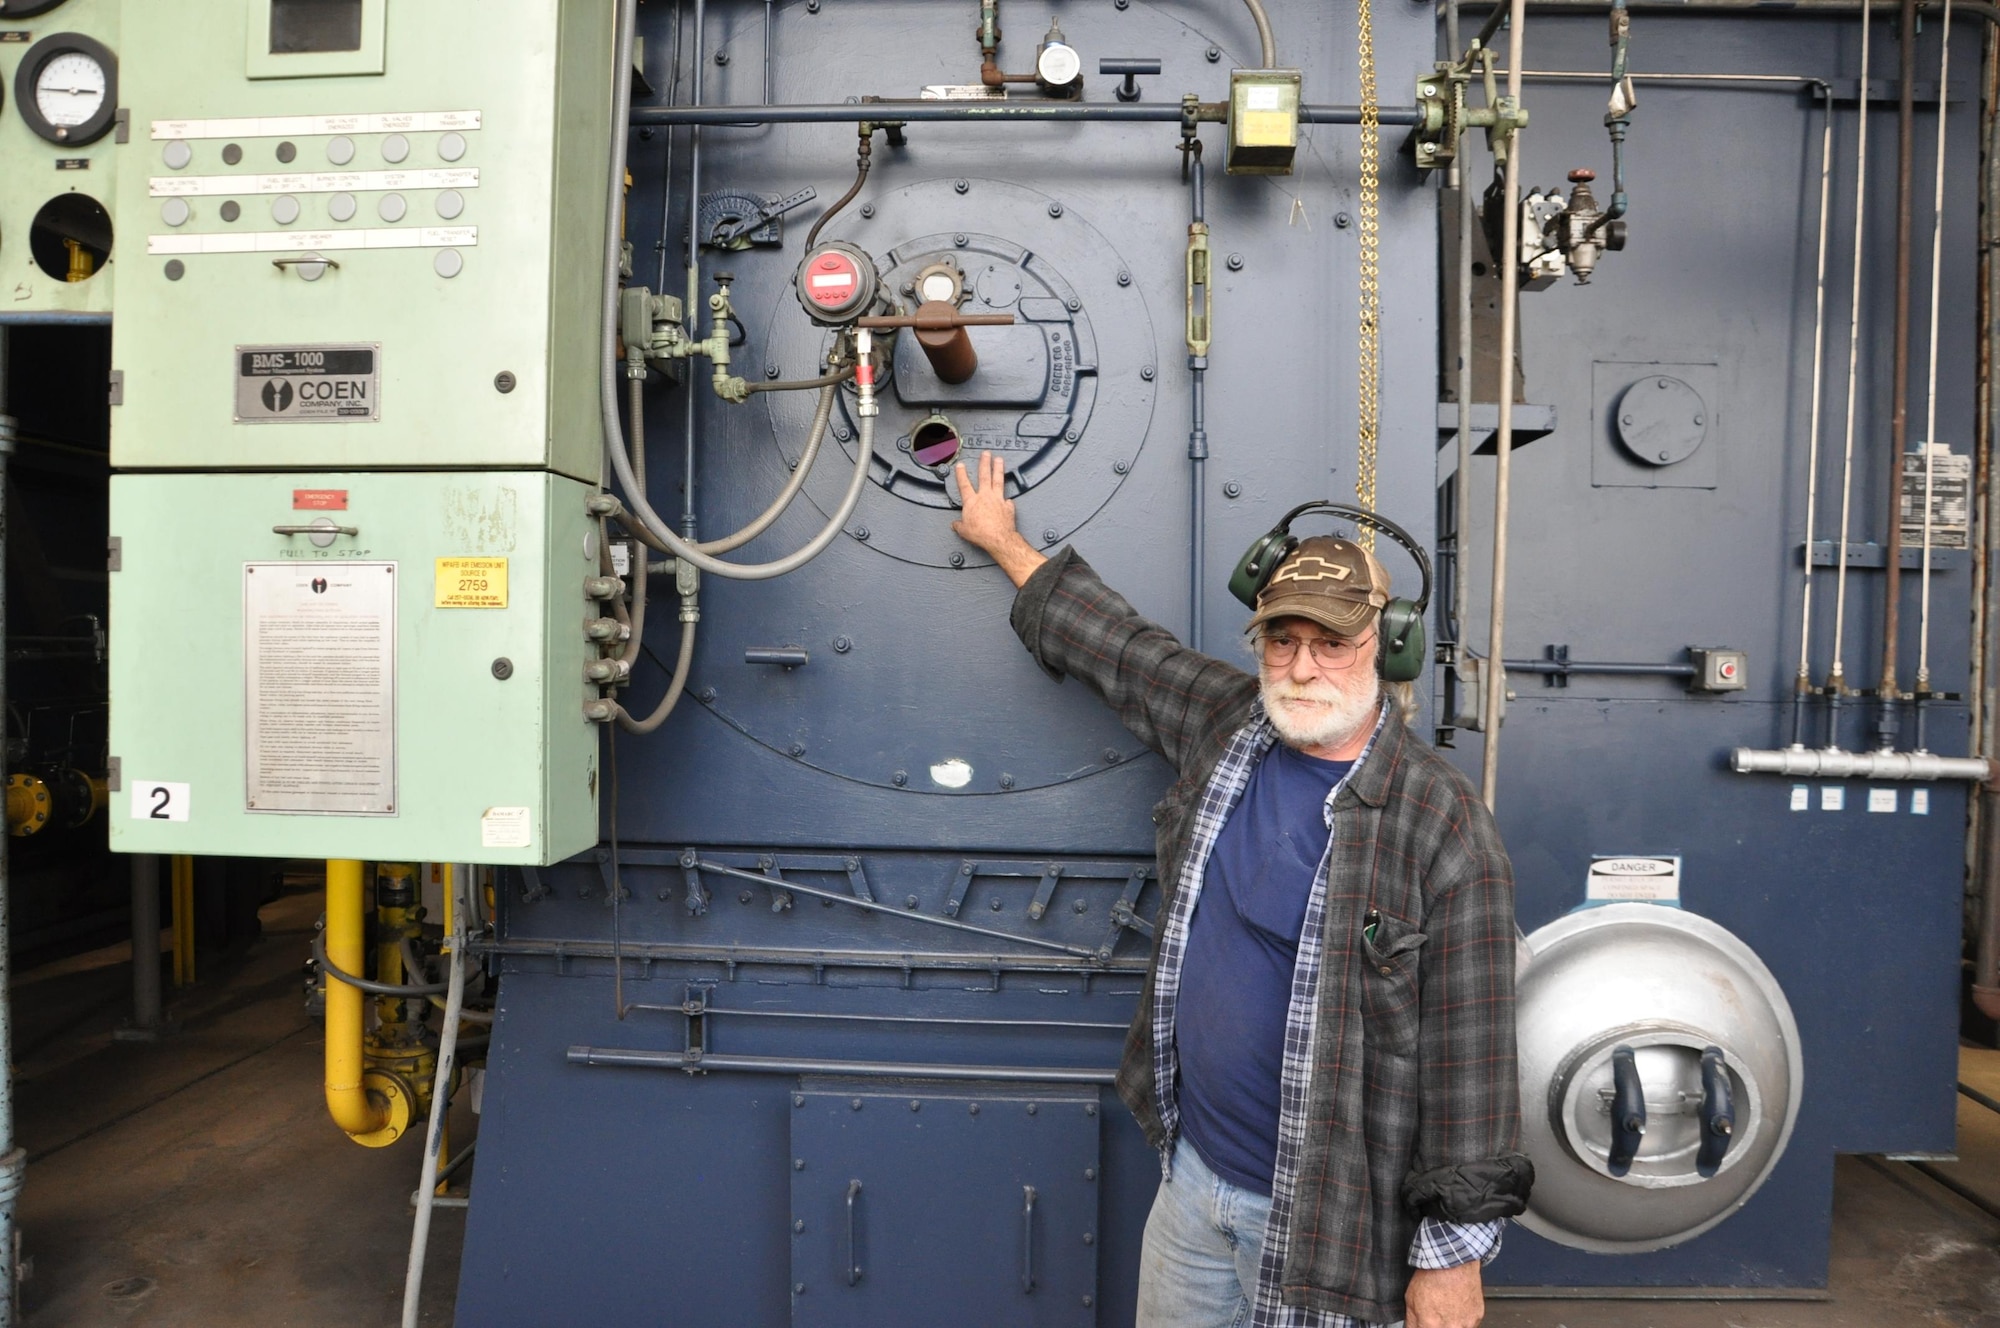 Bill Livesay, Boiler Plant supervisor, inspects one of the big boilers at Wright-Patterson Air Force Base. (U.S. Air Force photo/W. Eugene Barnett Jr.)